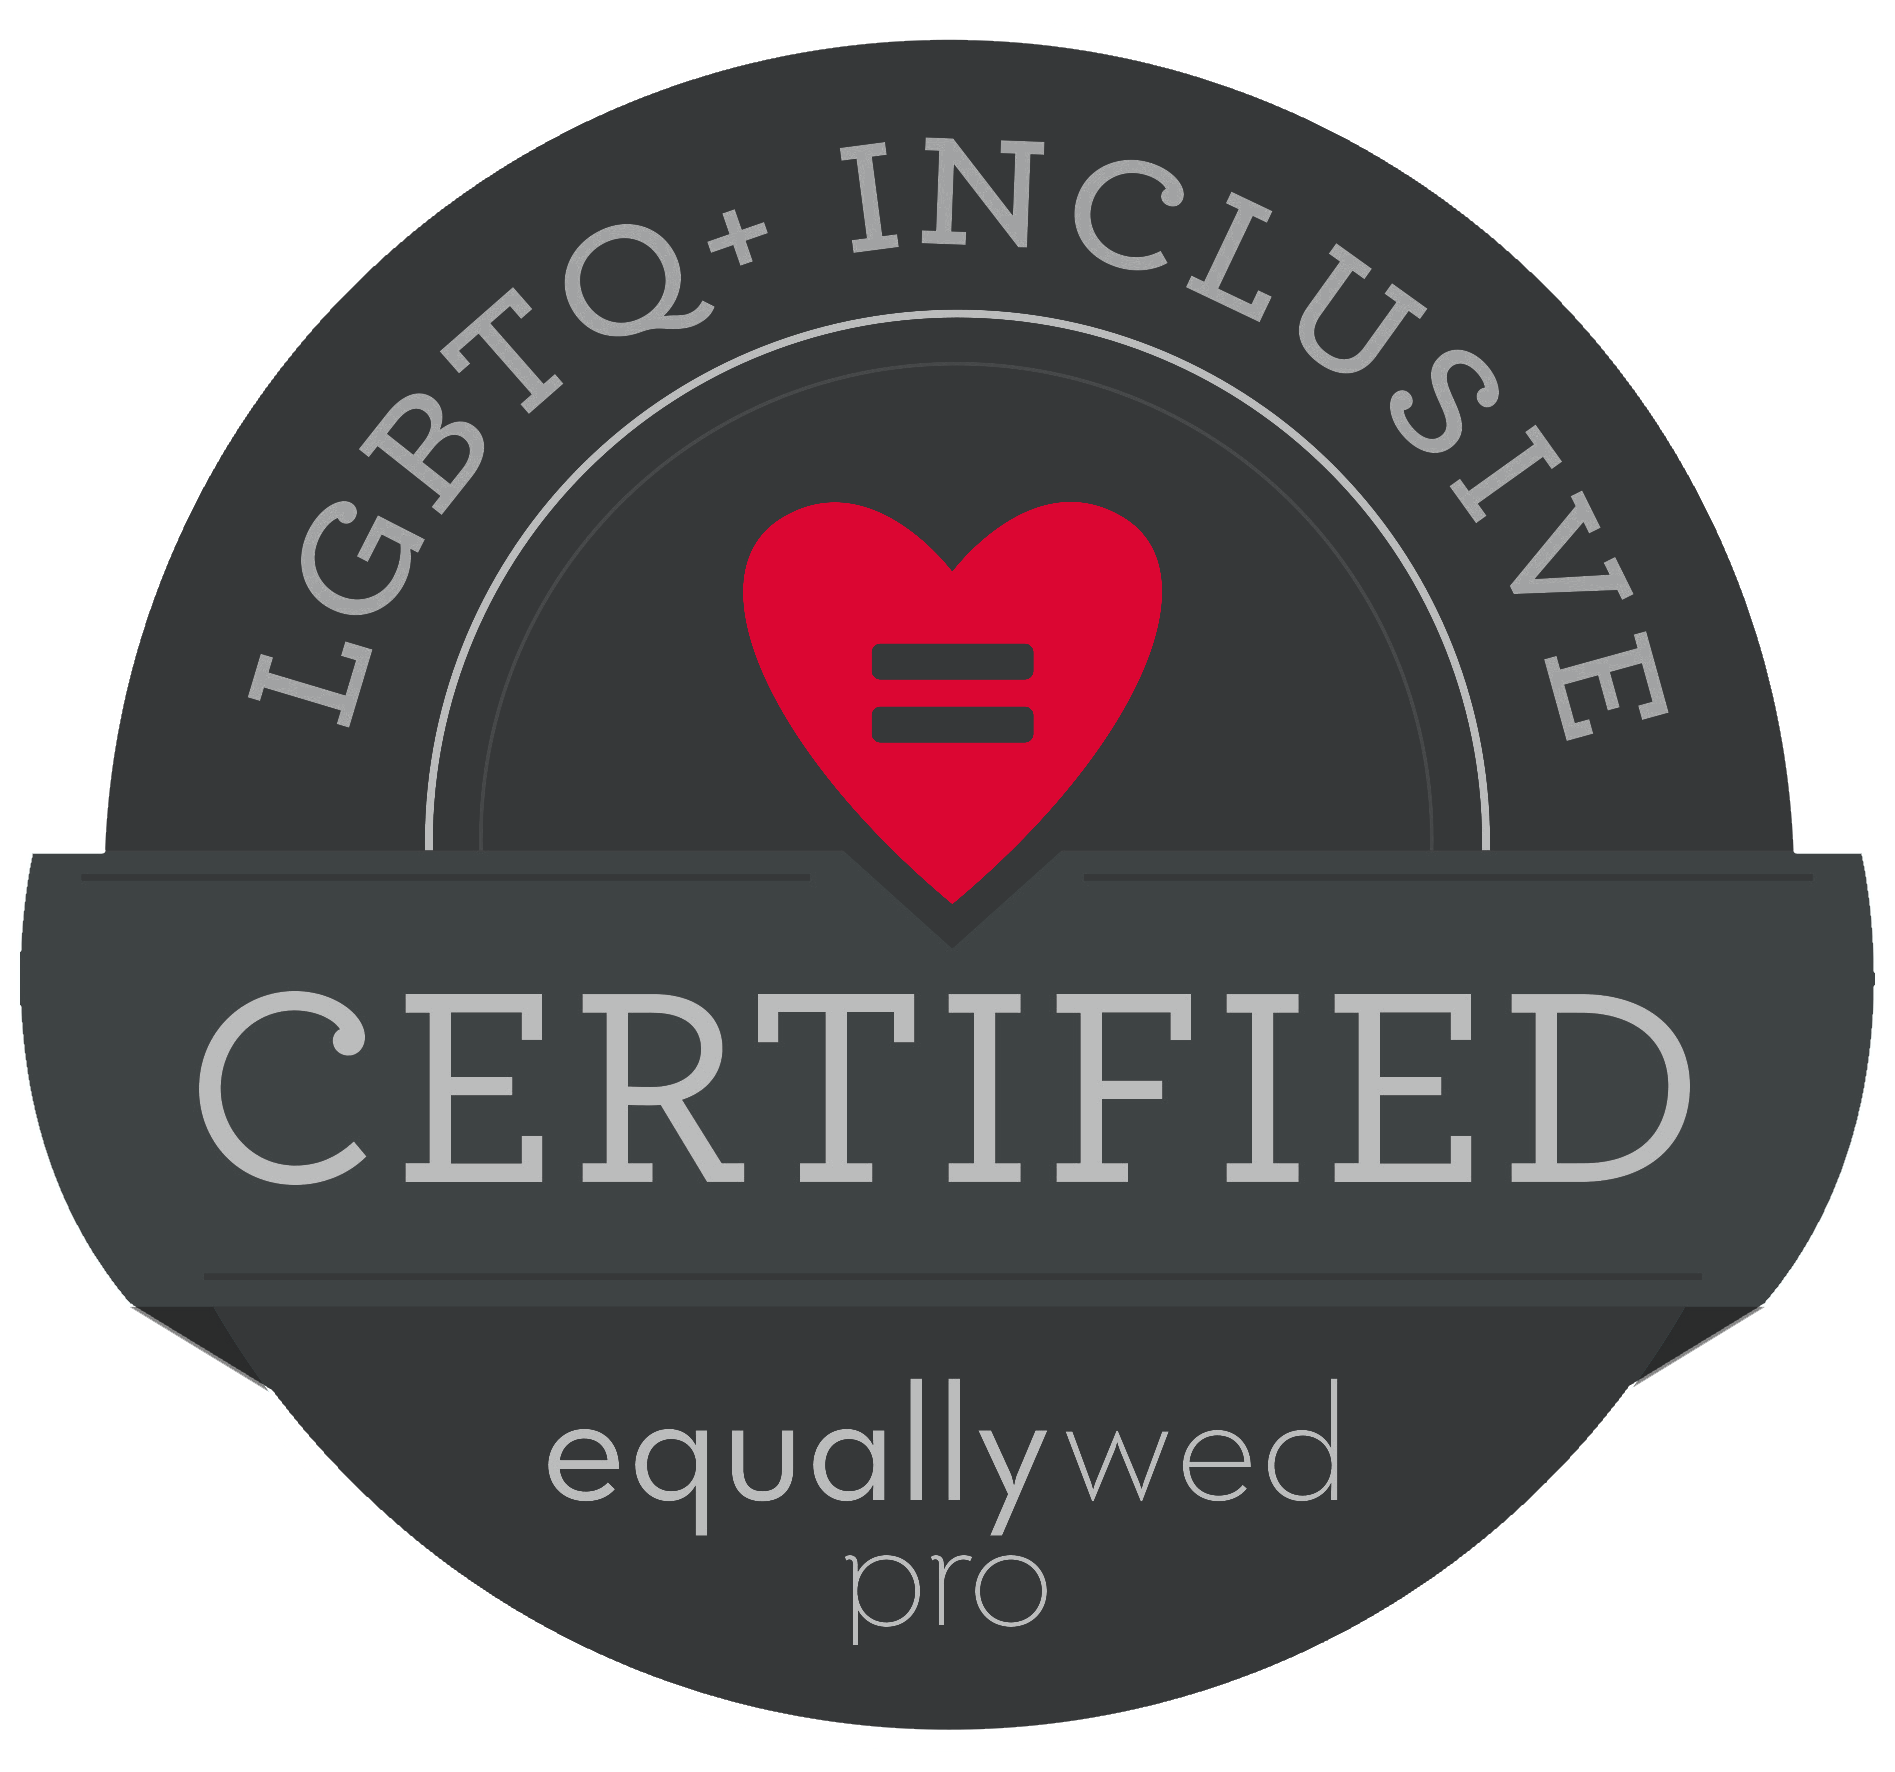 LGBTQ + Inclusive Certified, Equally Wed 2020